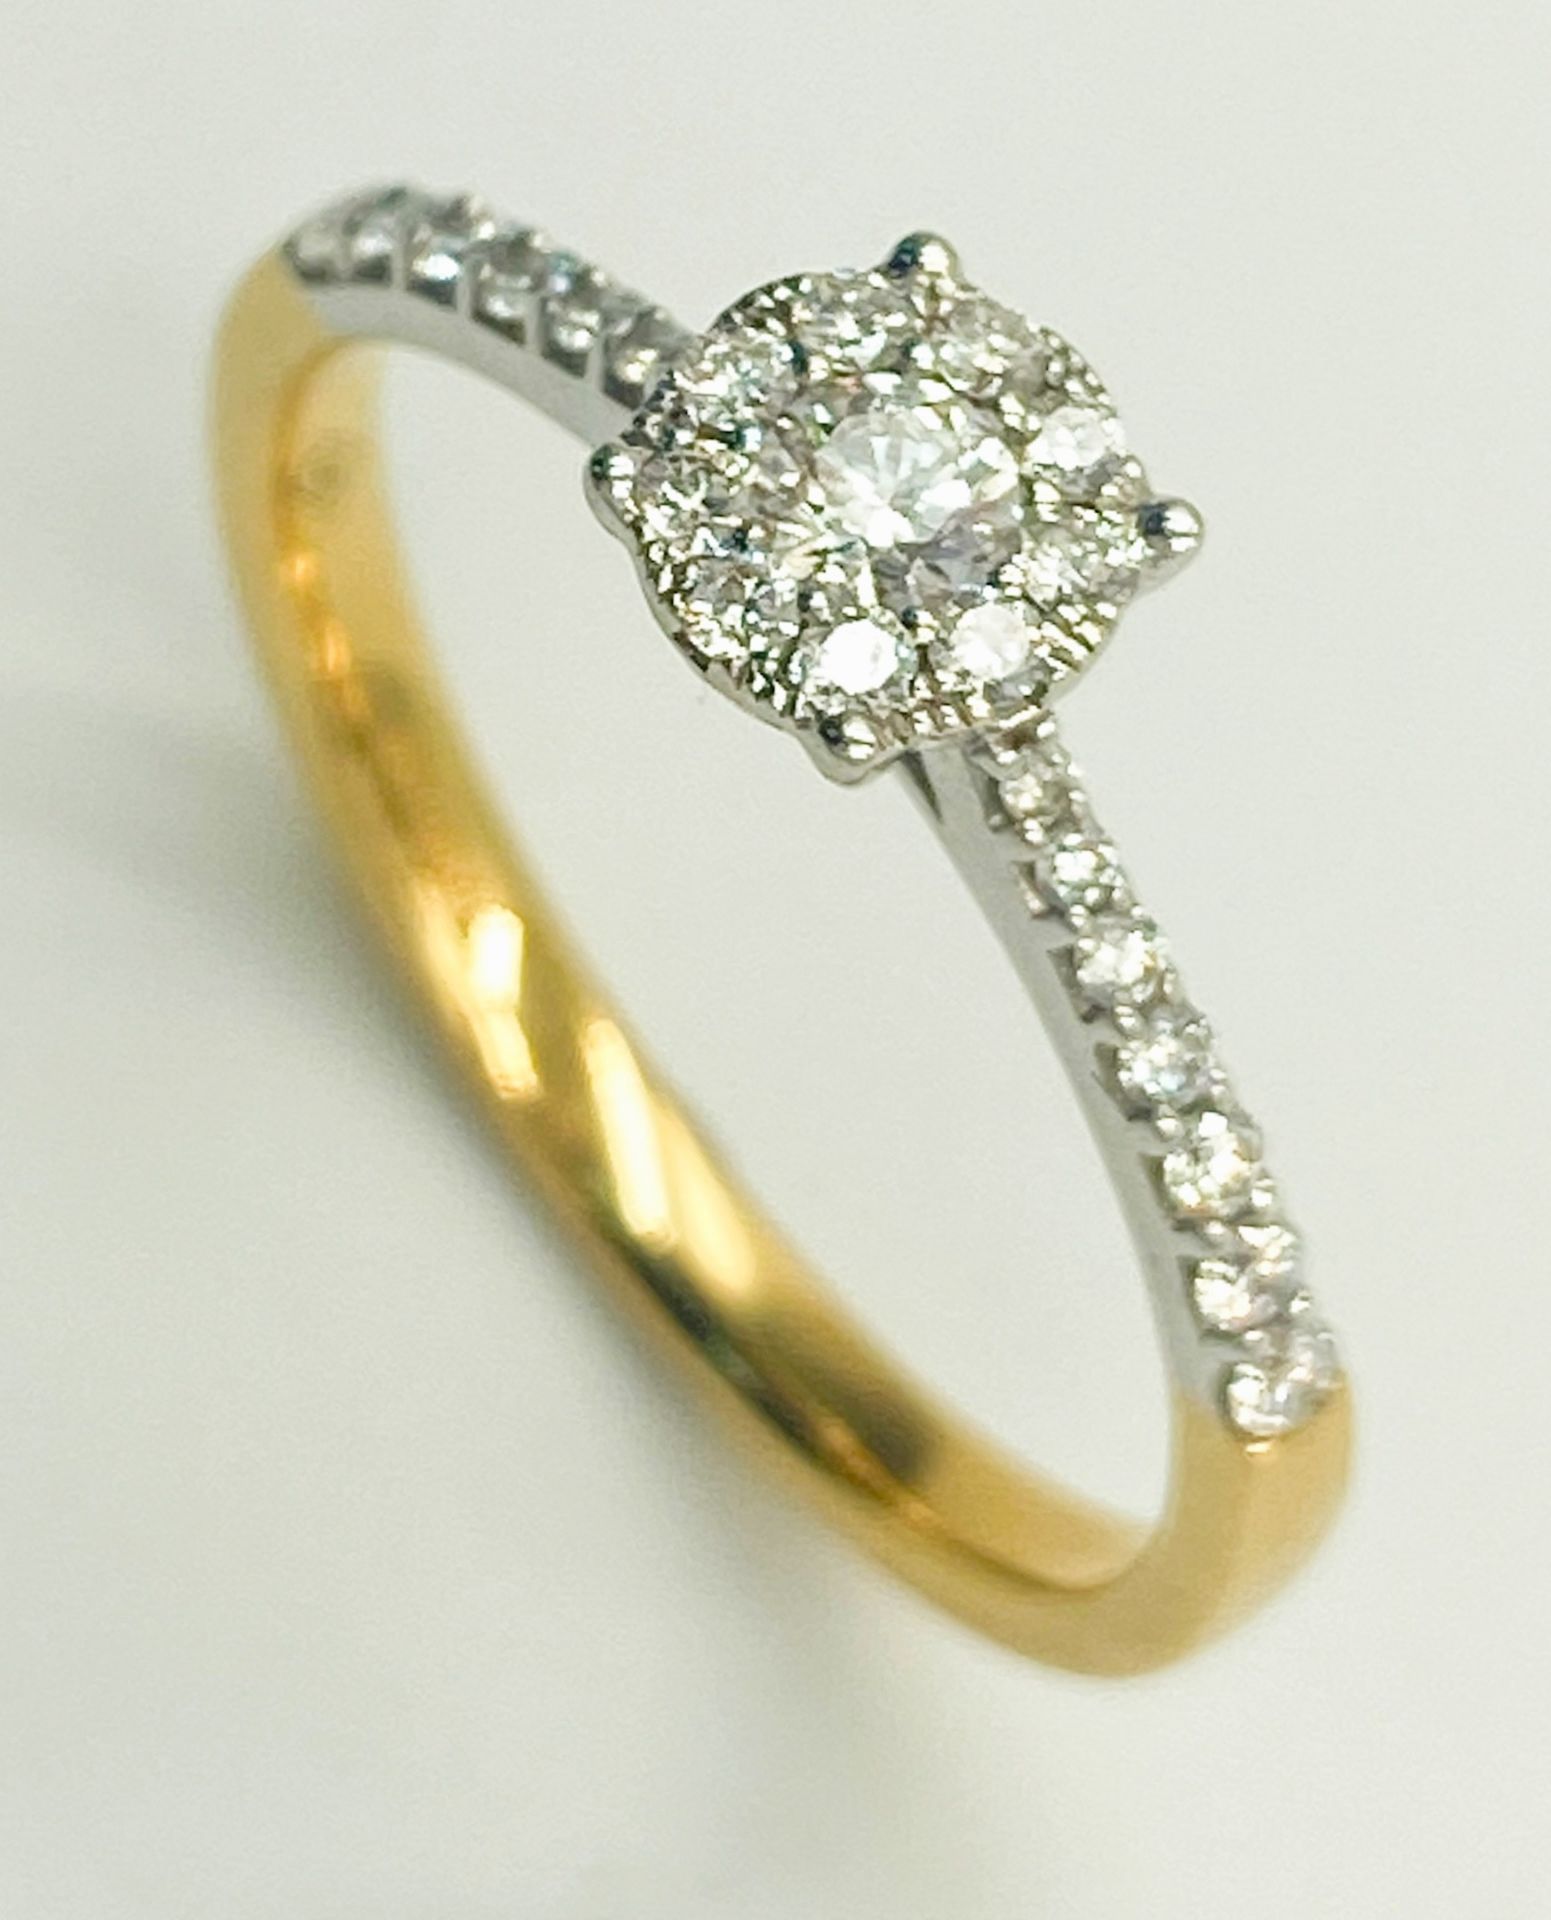 AN 18K YELLOW GOLD DIAMOND RING - 0.30CT. 2.5G. SIZE N. - Image 2 of 6